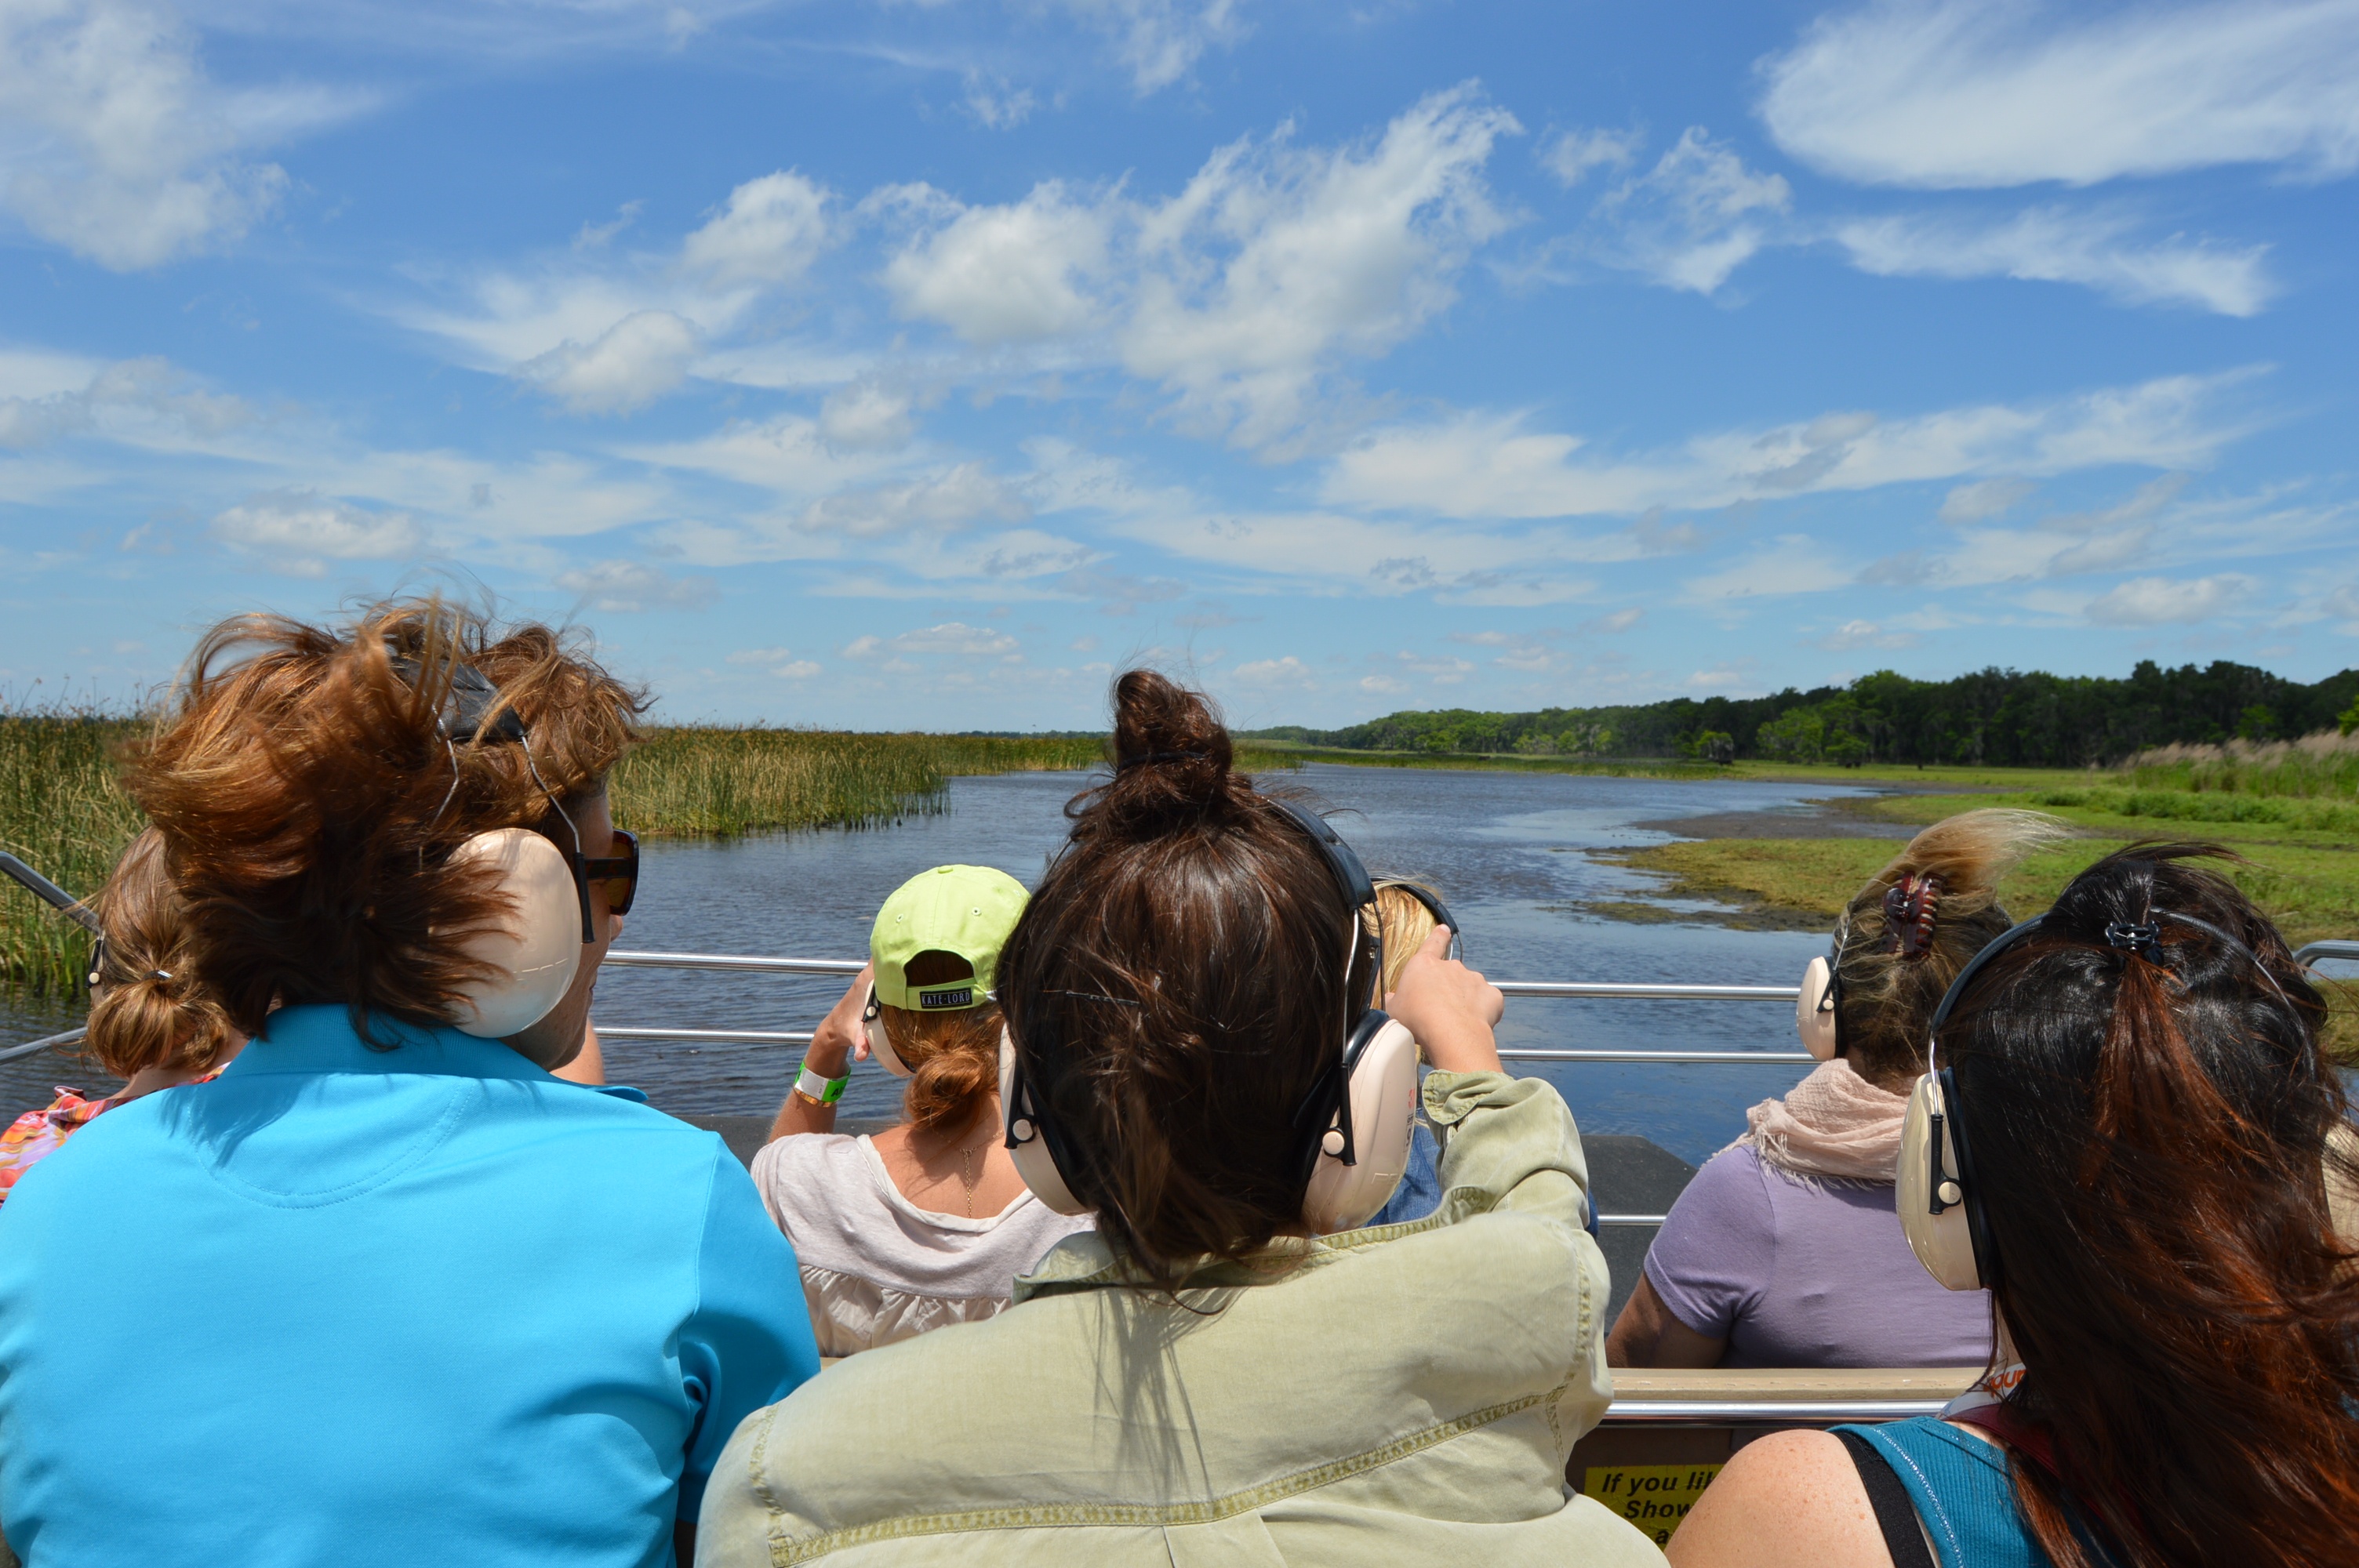 Why you should play hooky from work and go on an Orlando airboat tour